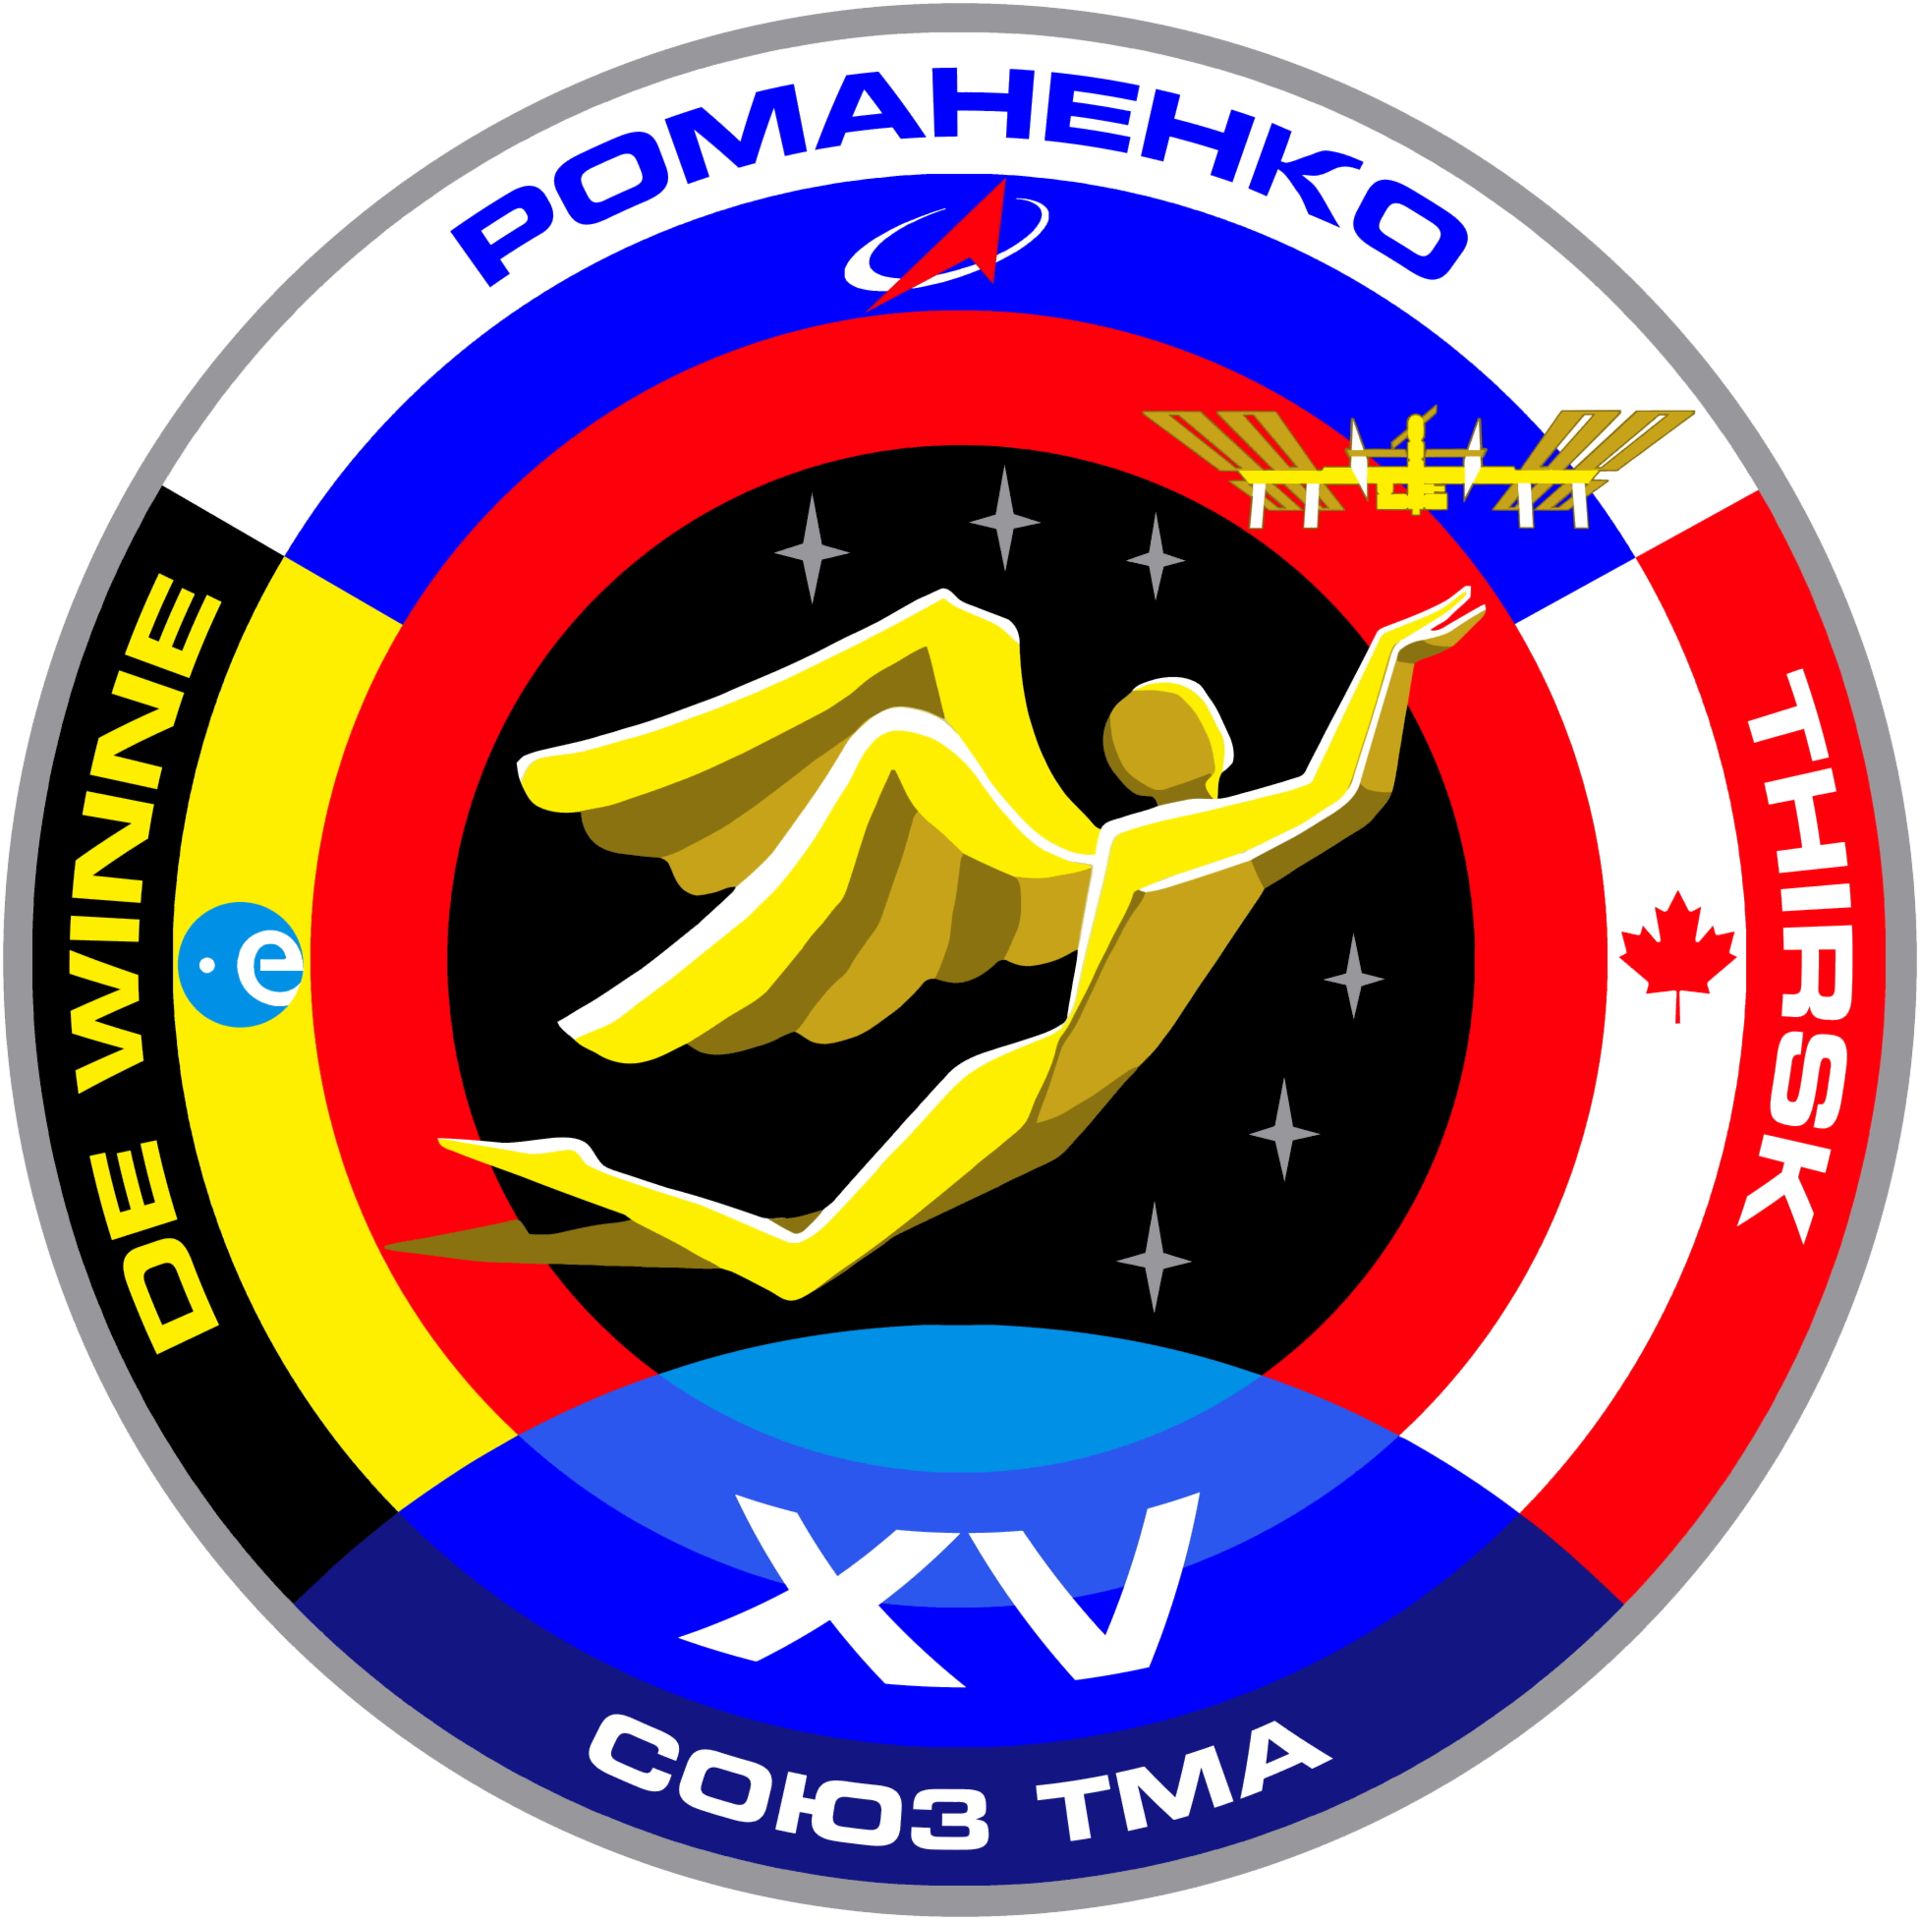 Mission patch for Soyuz TMA-15